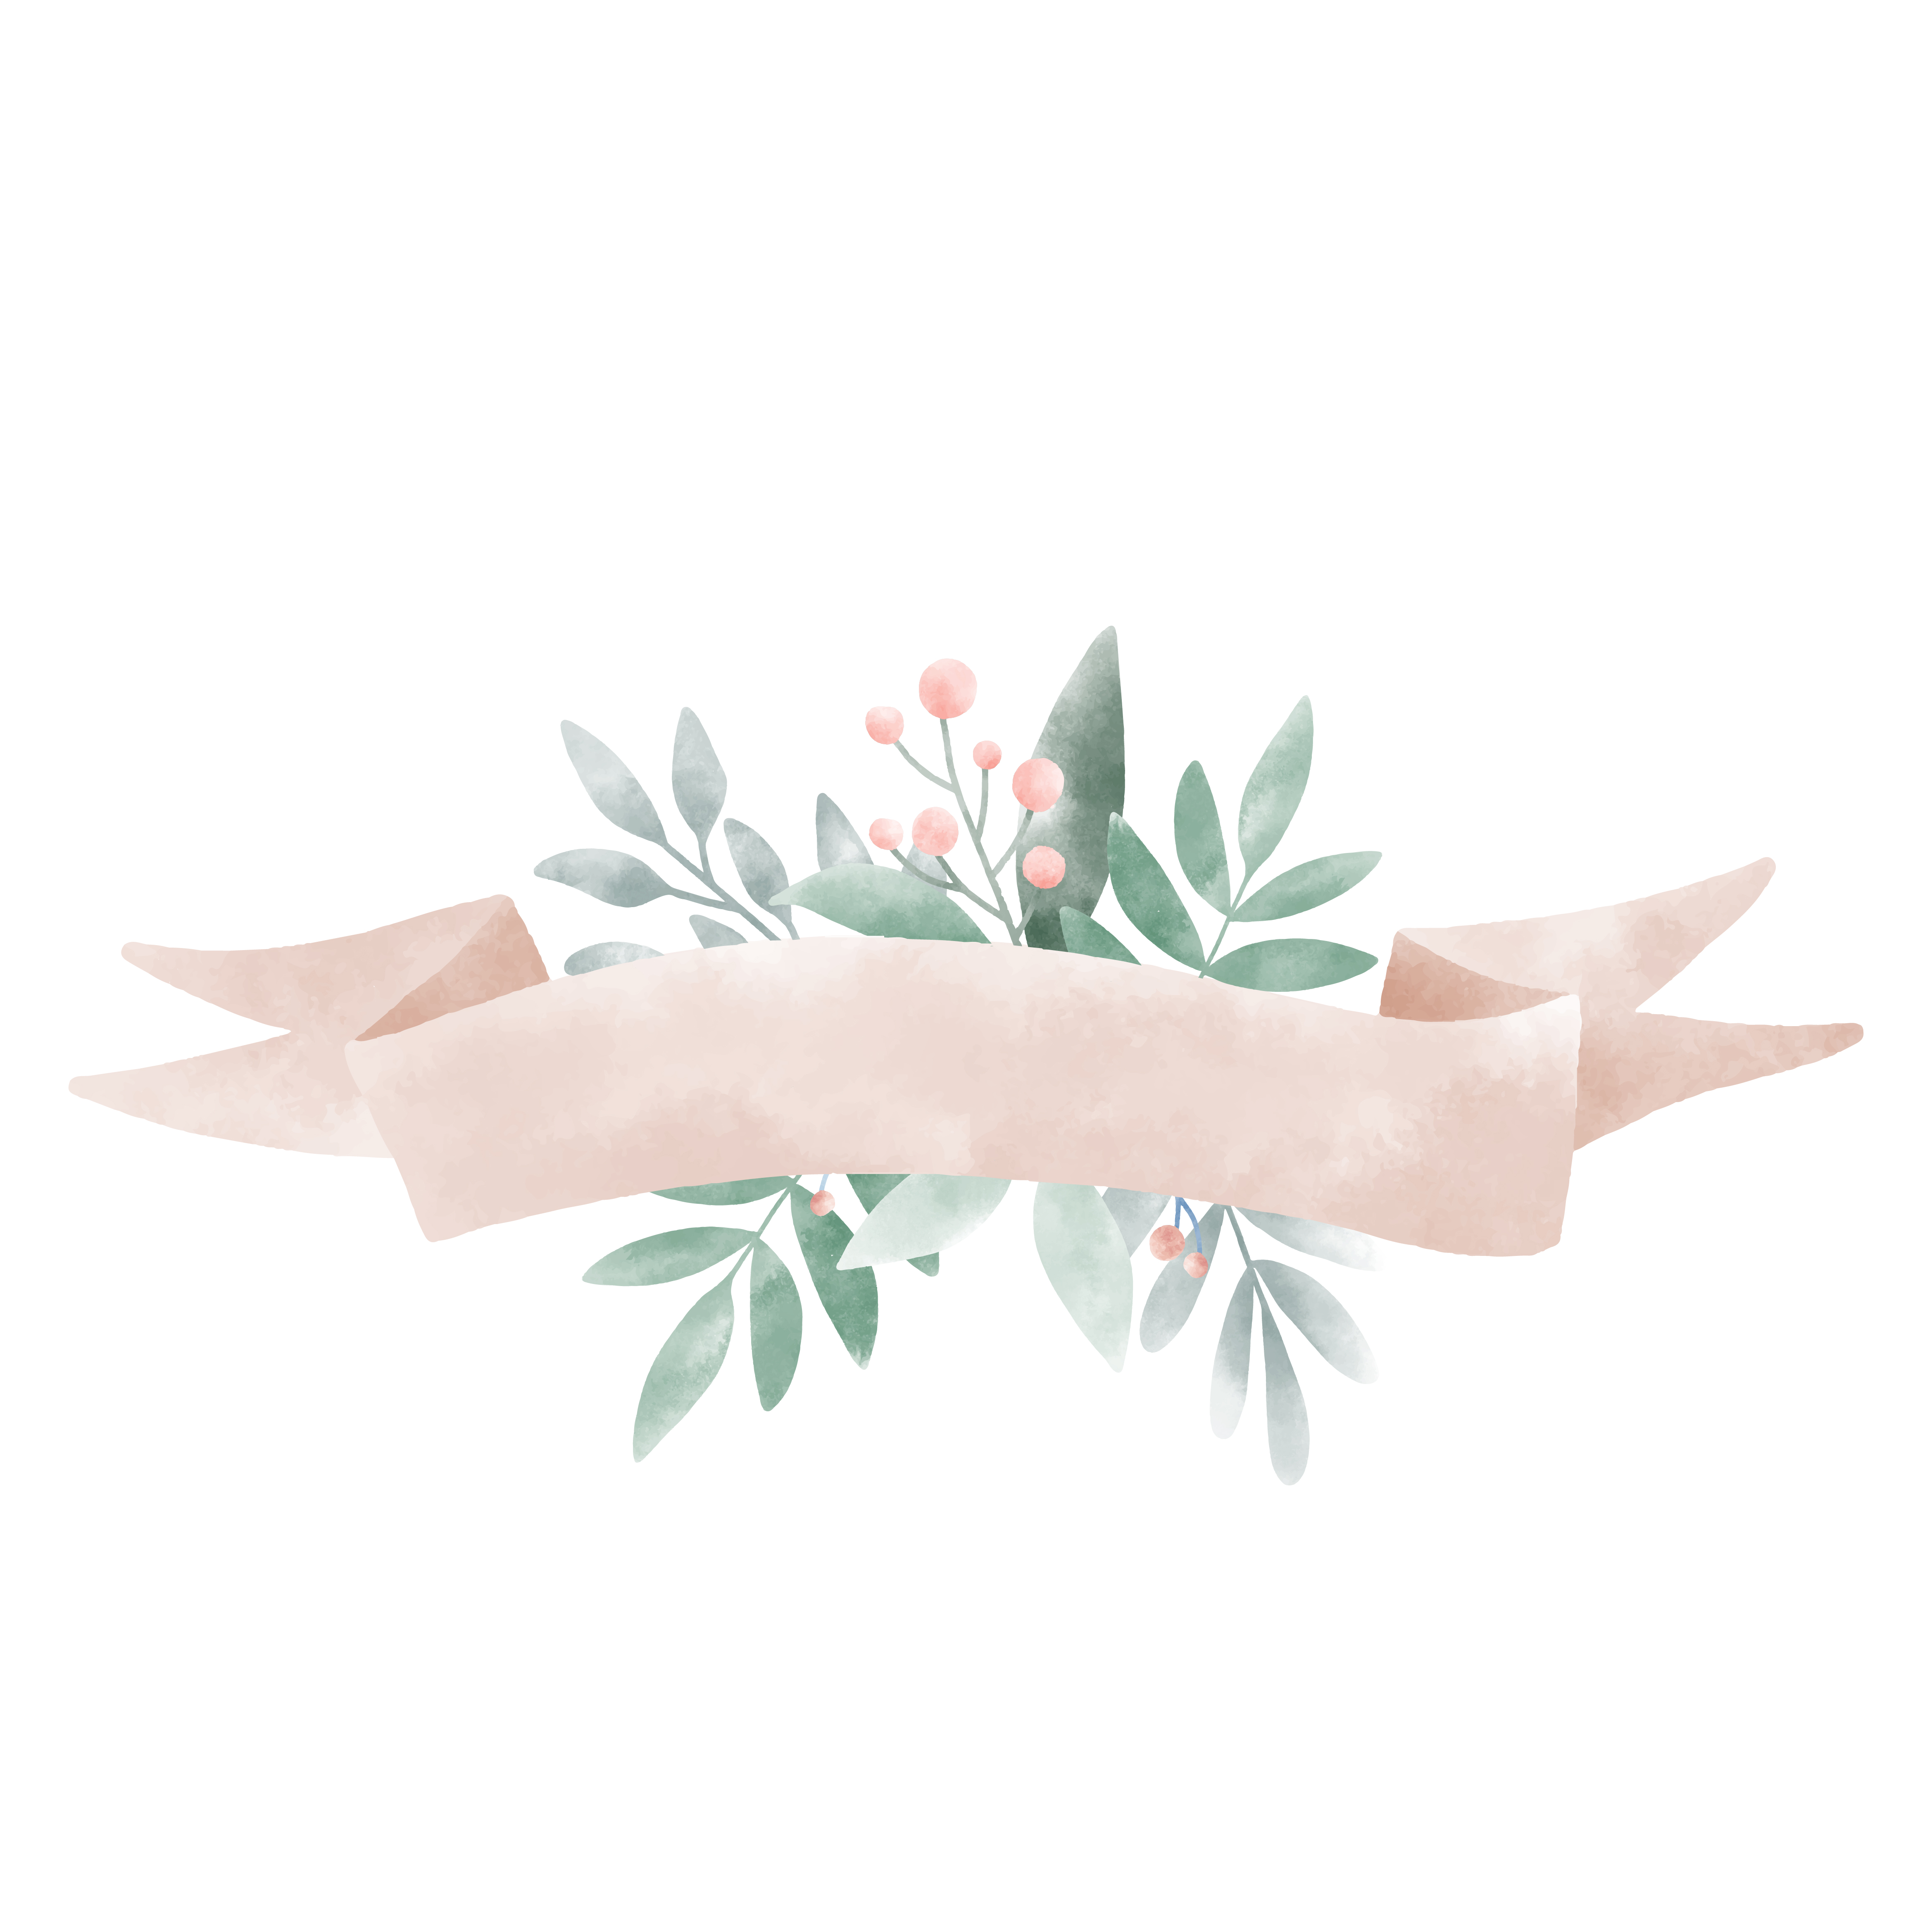 Download Watercolor leaves with a banner vector - Download Free ...